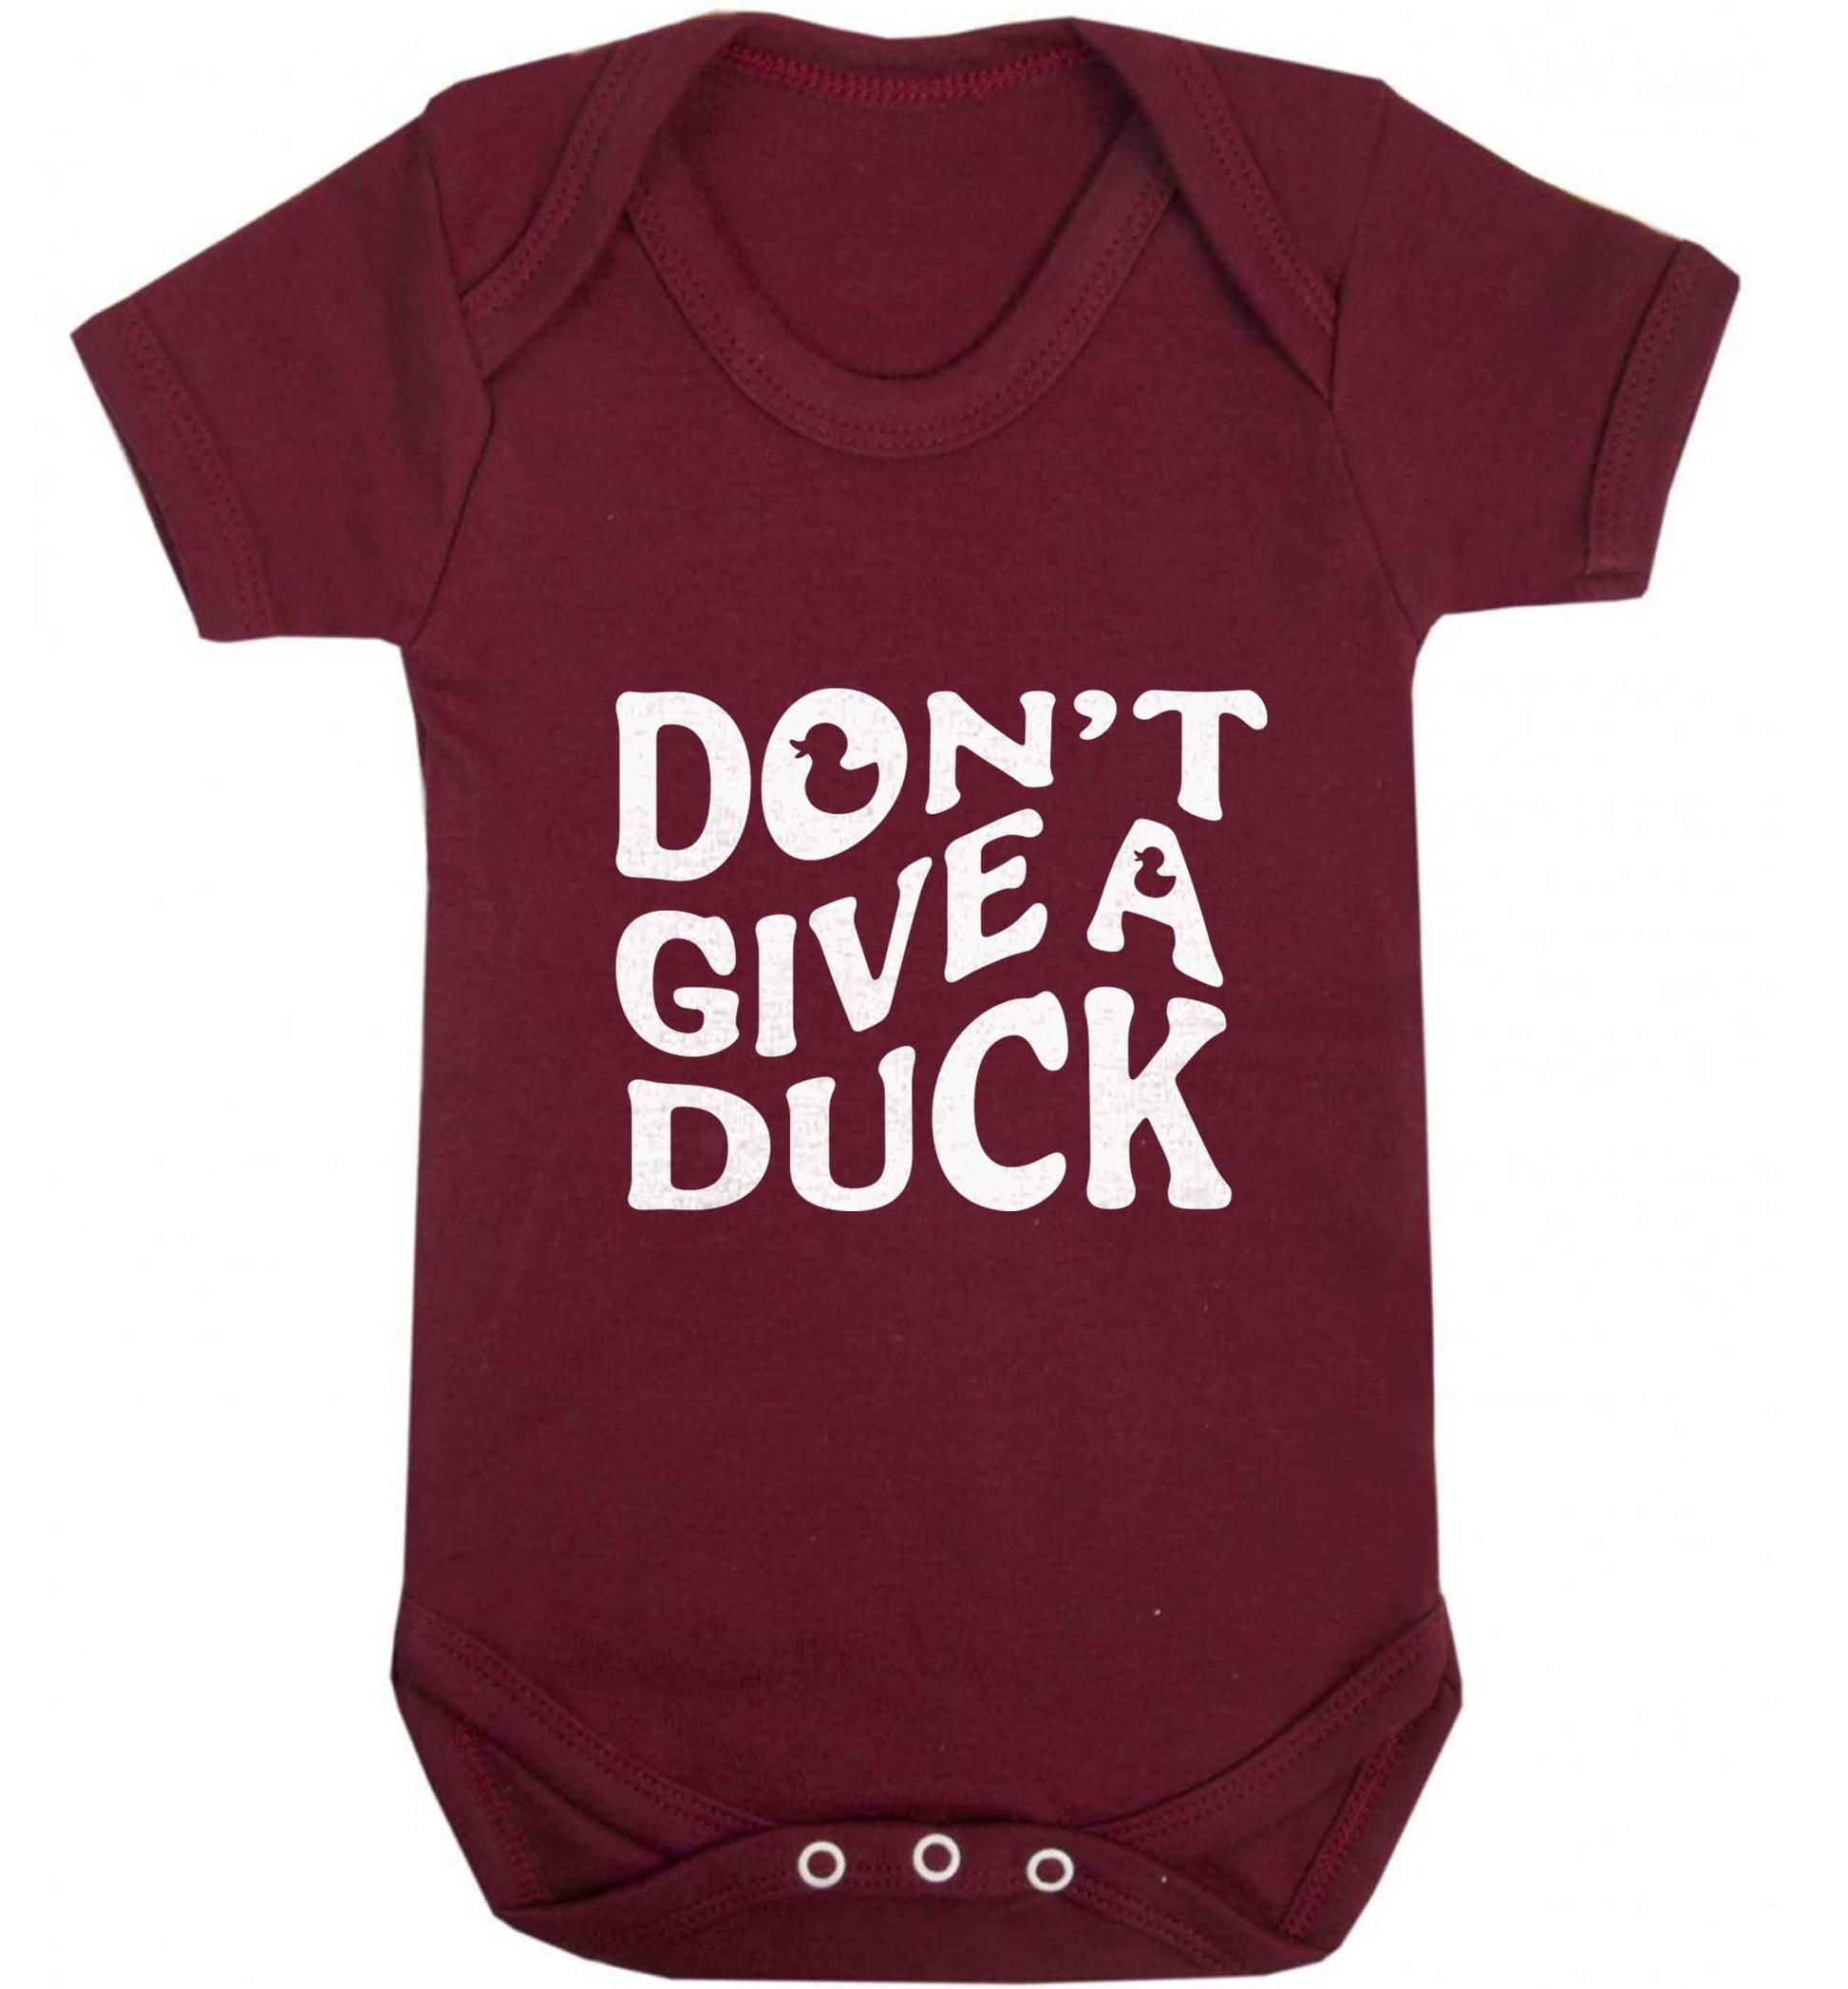 Don't give a duck baby vest maroon 18-24 months